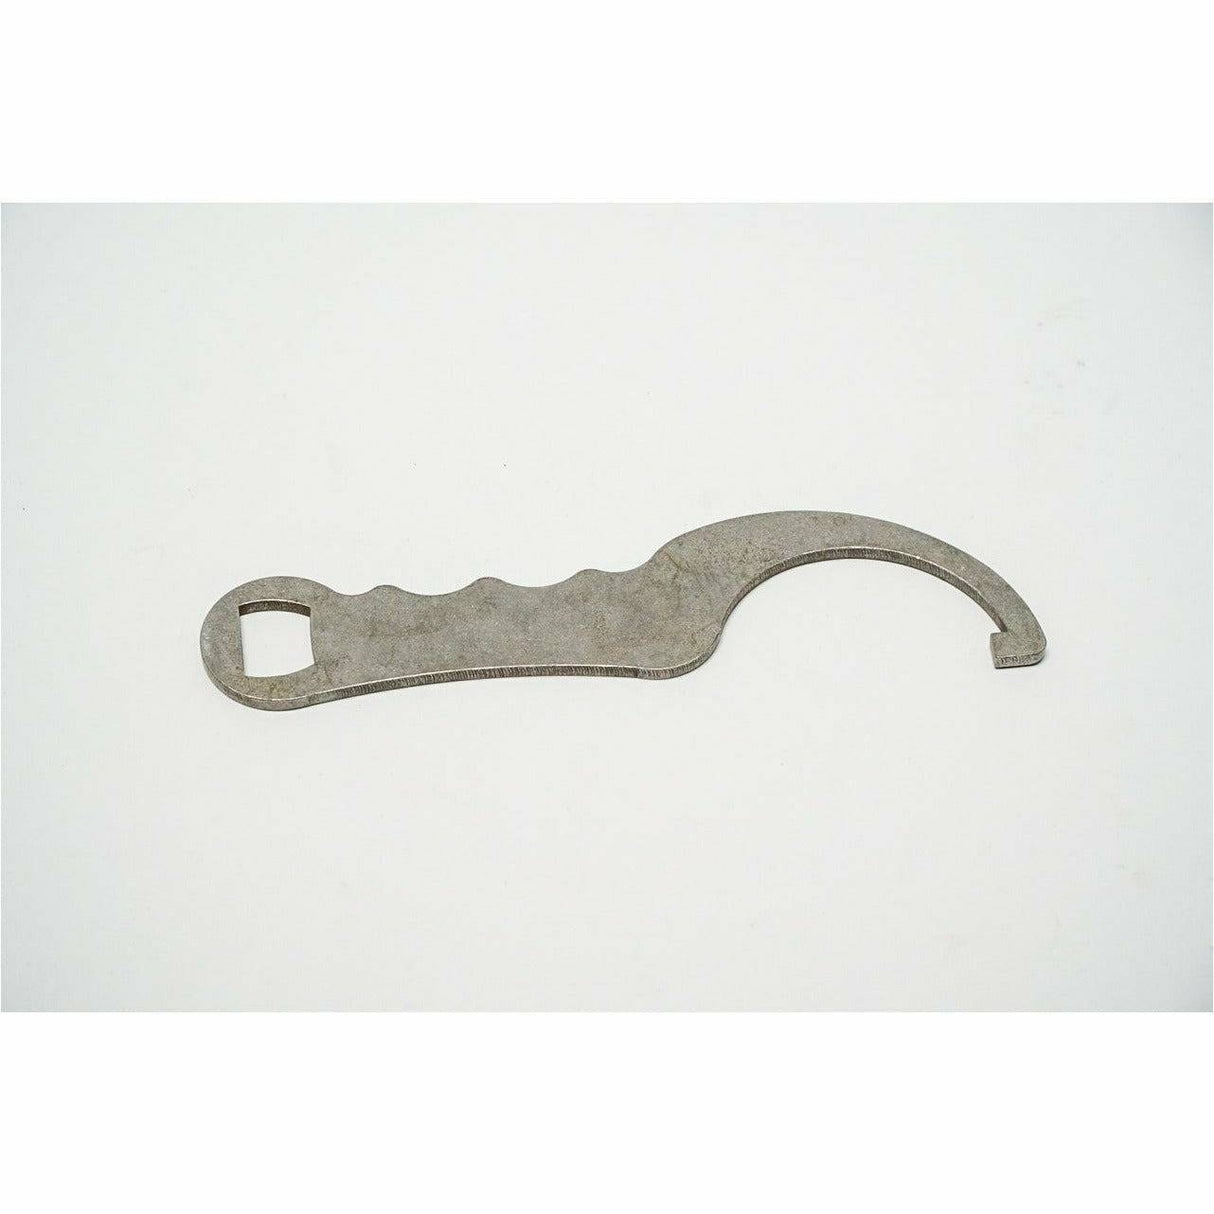 Cross Over and Pre Load Spanner Wrench